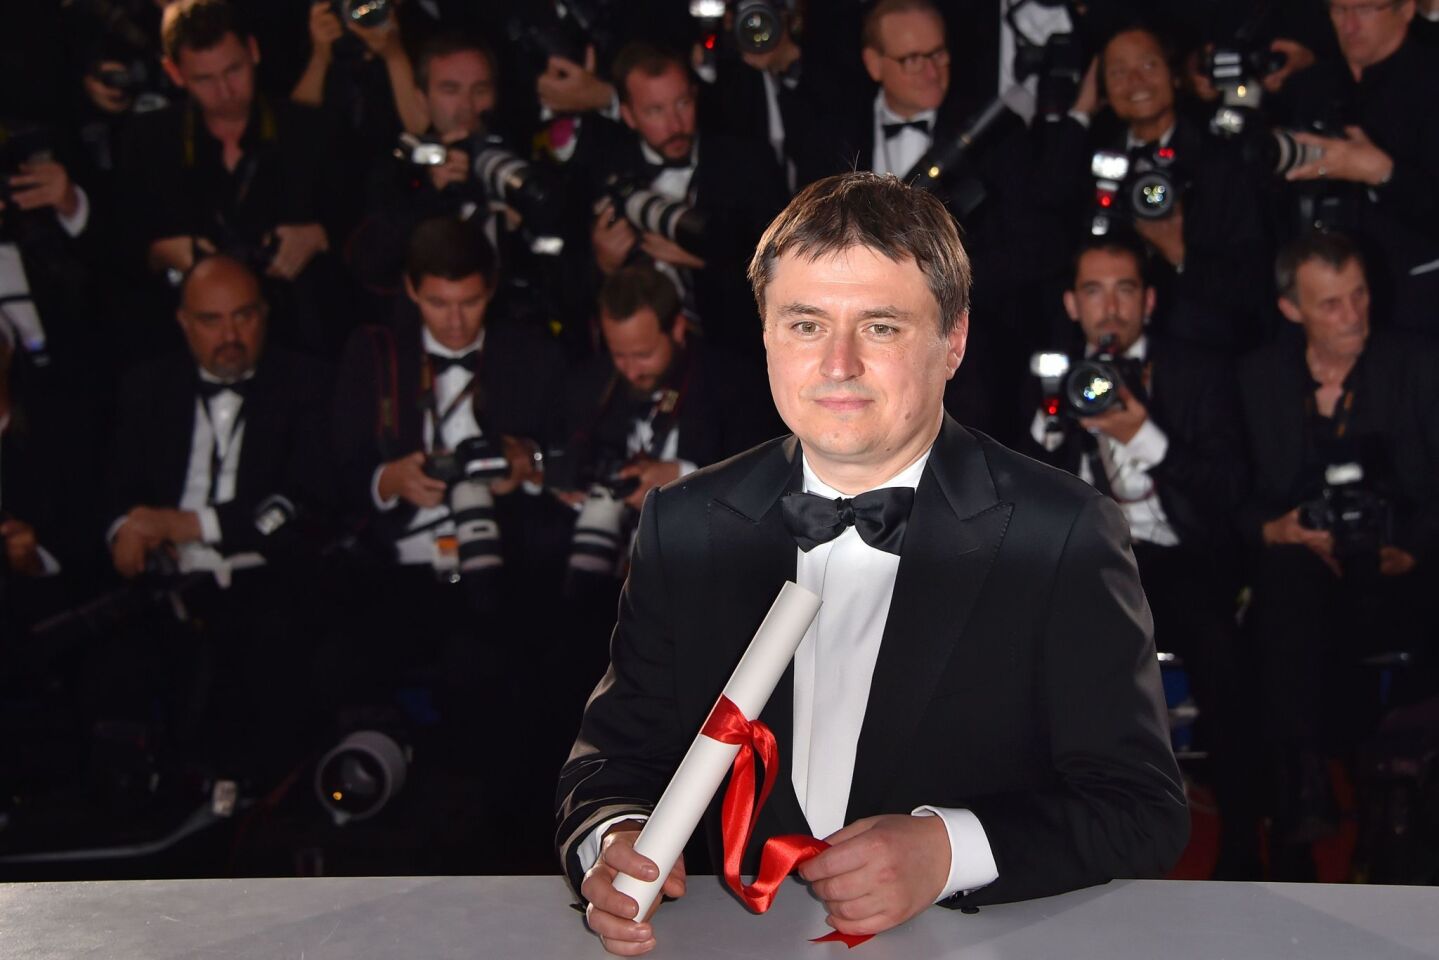 Romanian director Cristian Mungiu with his trophy during a photo call after he was awarded the Best Director prize for the film "Graduation" ("Bacalaureate").